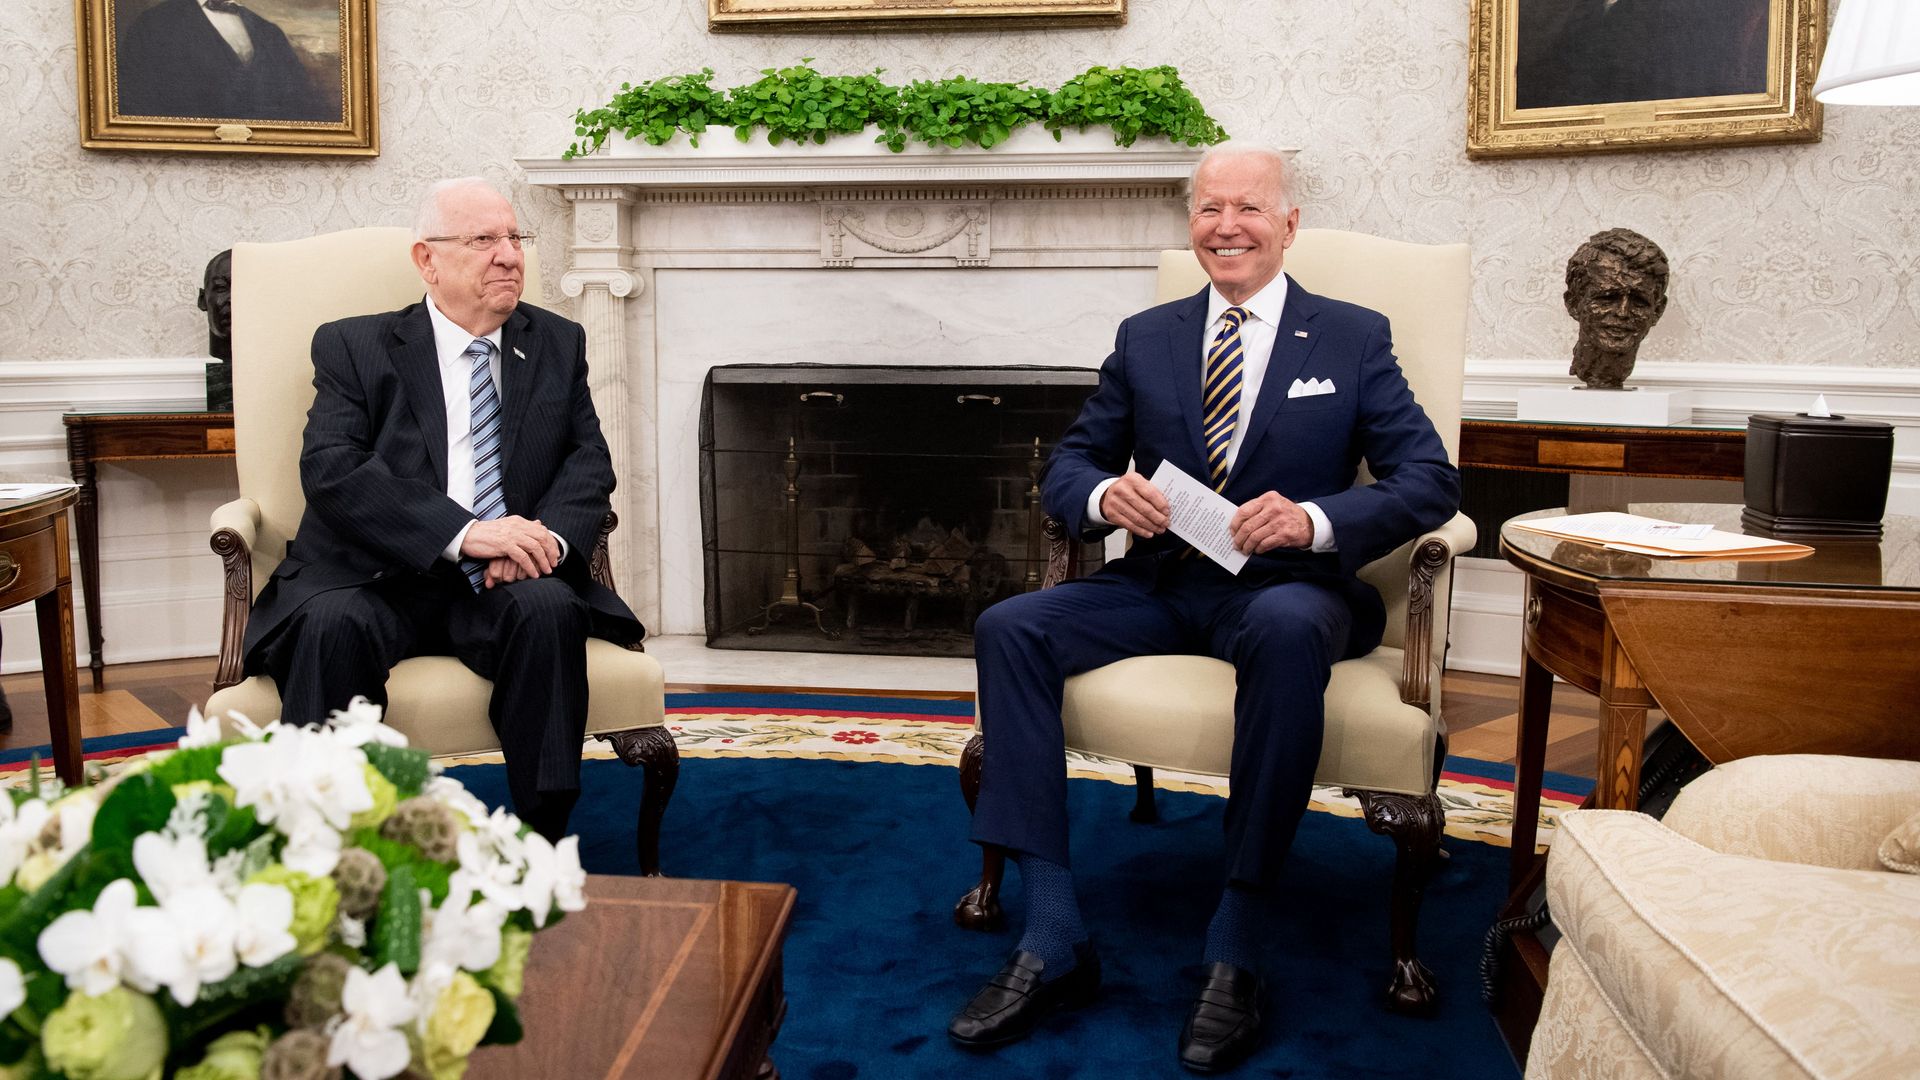 President Biden is seen sitting in the Oval Office with Israeli President Reuven Rivlin.